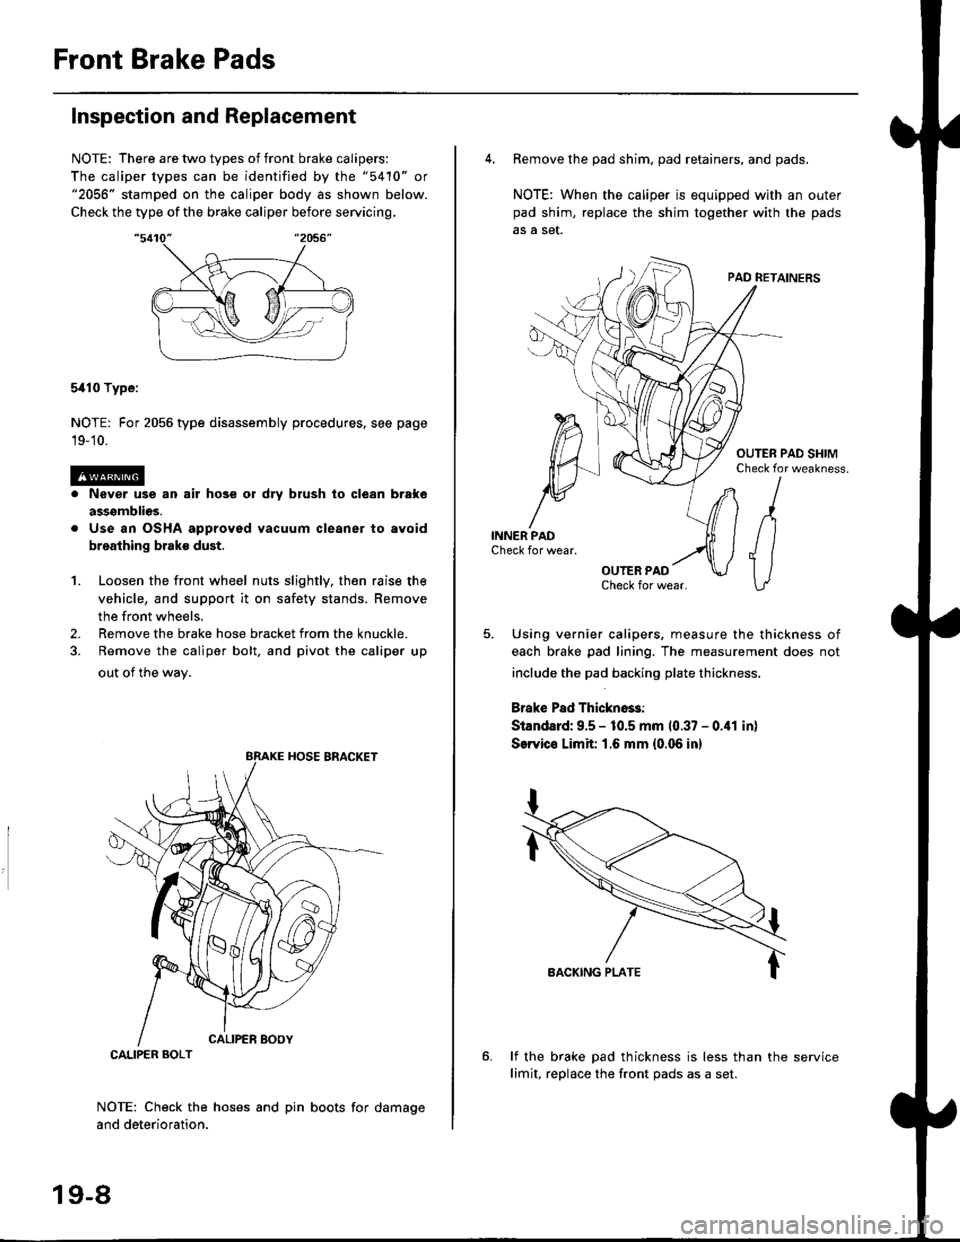 HONDA CIVIC 2000 6.G Workshop Manual Front Brake Pads
Inspection and Replacement
NOTE: There are two types of front brake calipers:
The caliper types can be identified by the "5410" or"2056" stamped on the caliper body as shown below.
Ch